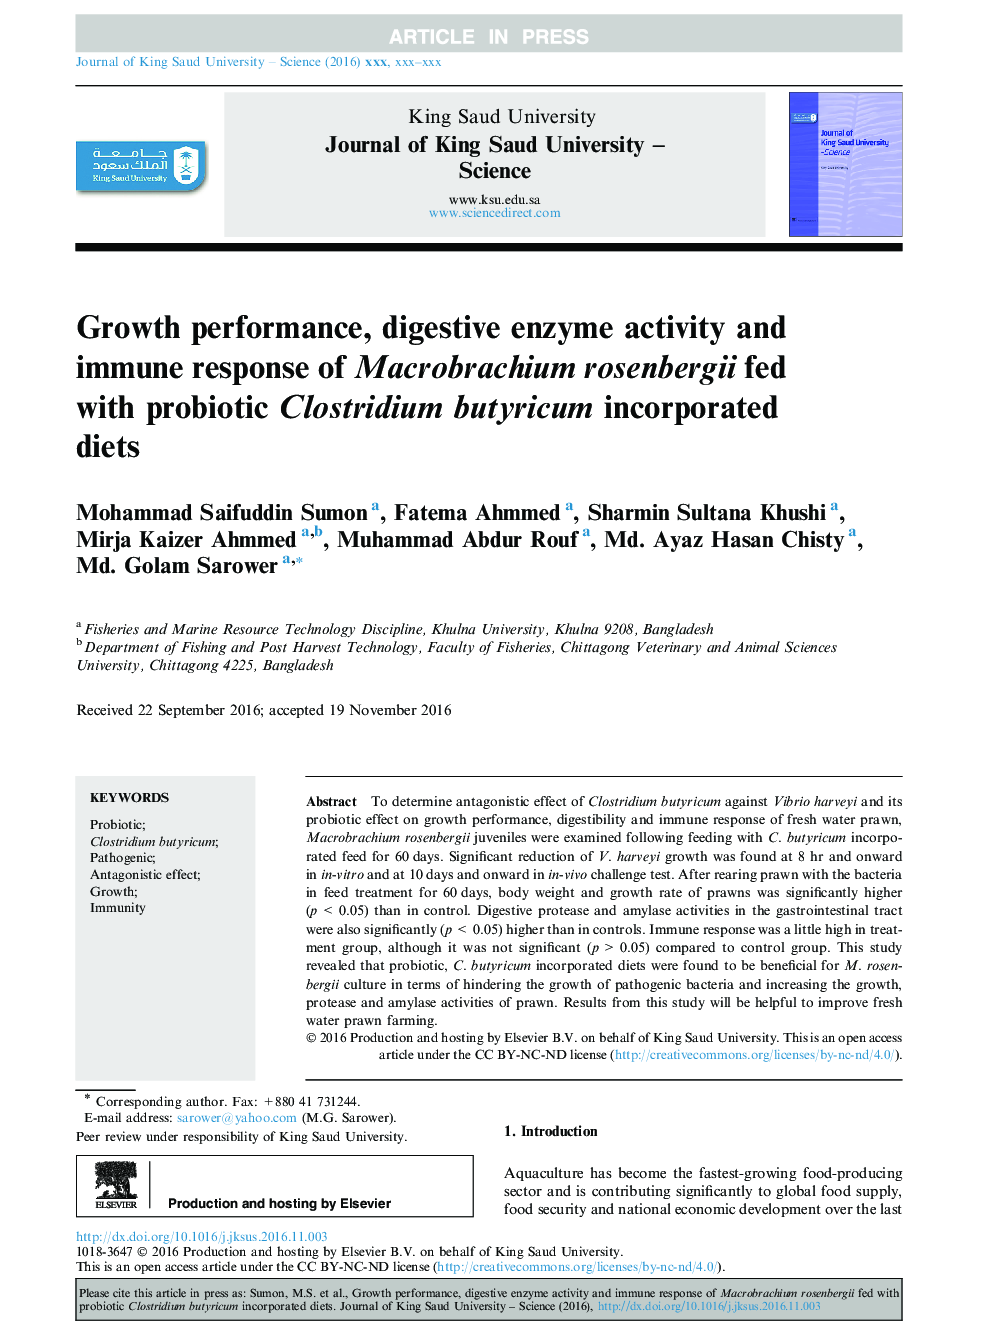 Growth performance, digestive enzyme activity and immune response of Macrobrachium rosenbergii fed with probiotic Clostridium butyricum incorporated diets